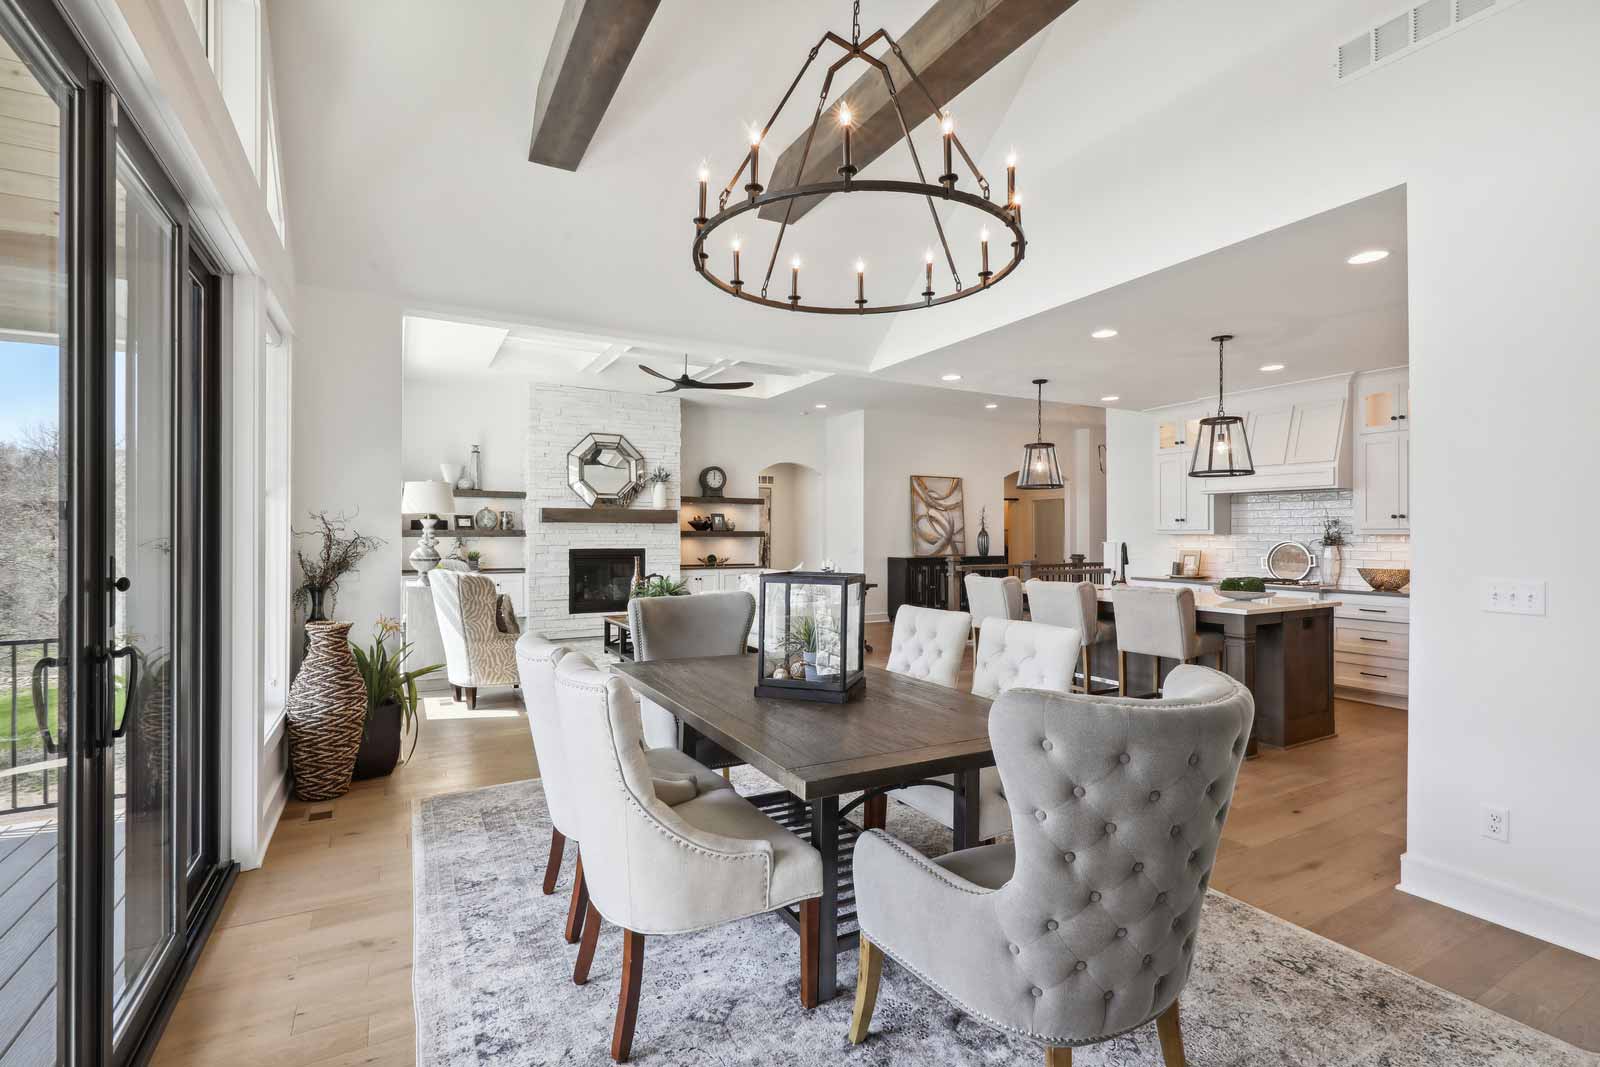 Dining area with rustic chandelier